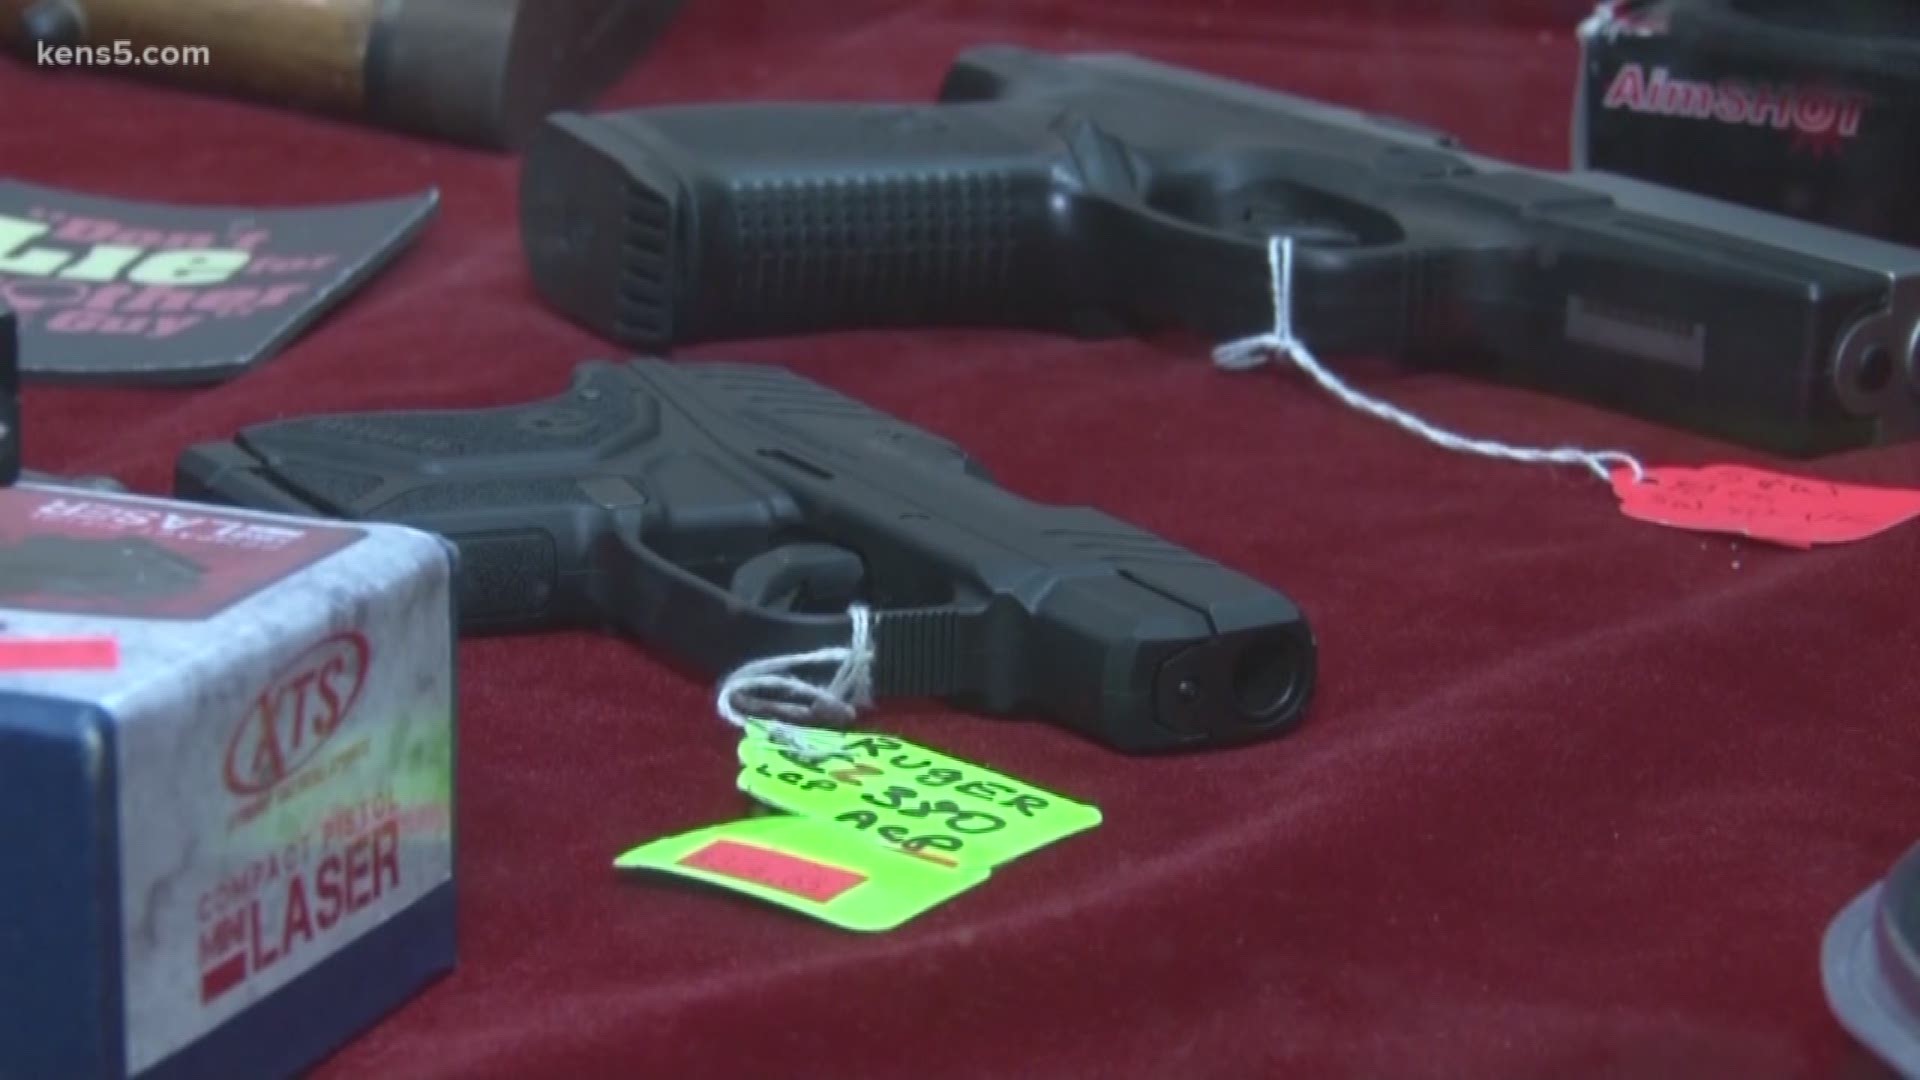 The City of San Antonio wants to curb gun violence and the Public Safety Committee is considering measures that could impact businesses and gun owners across the city.